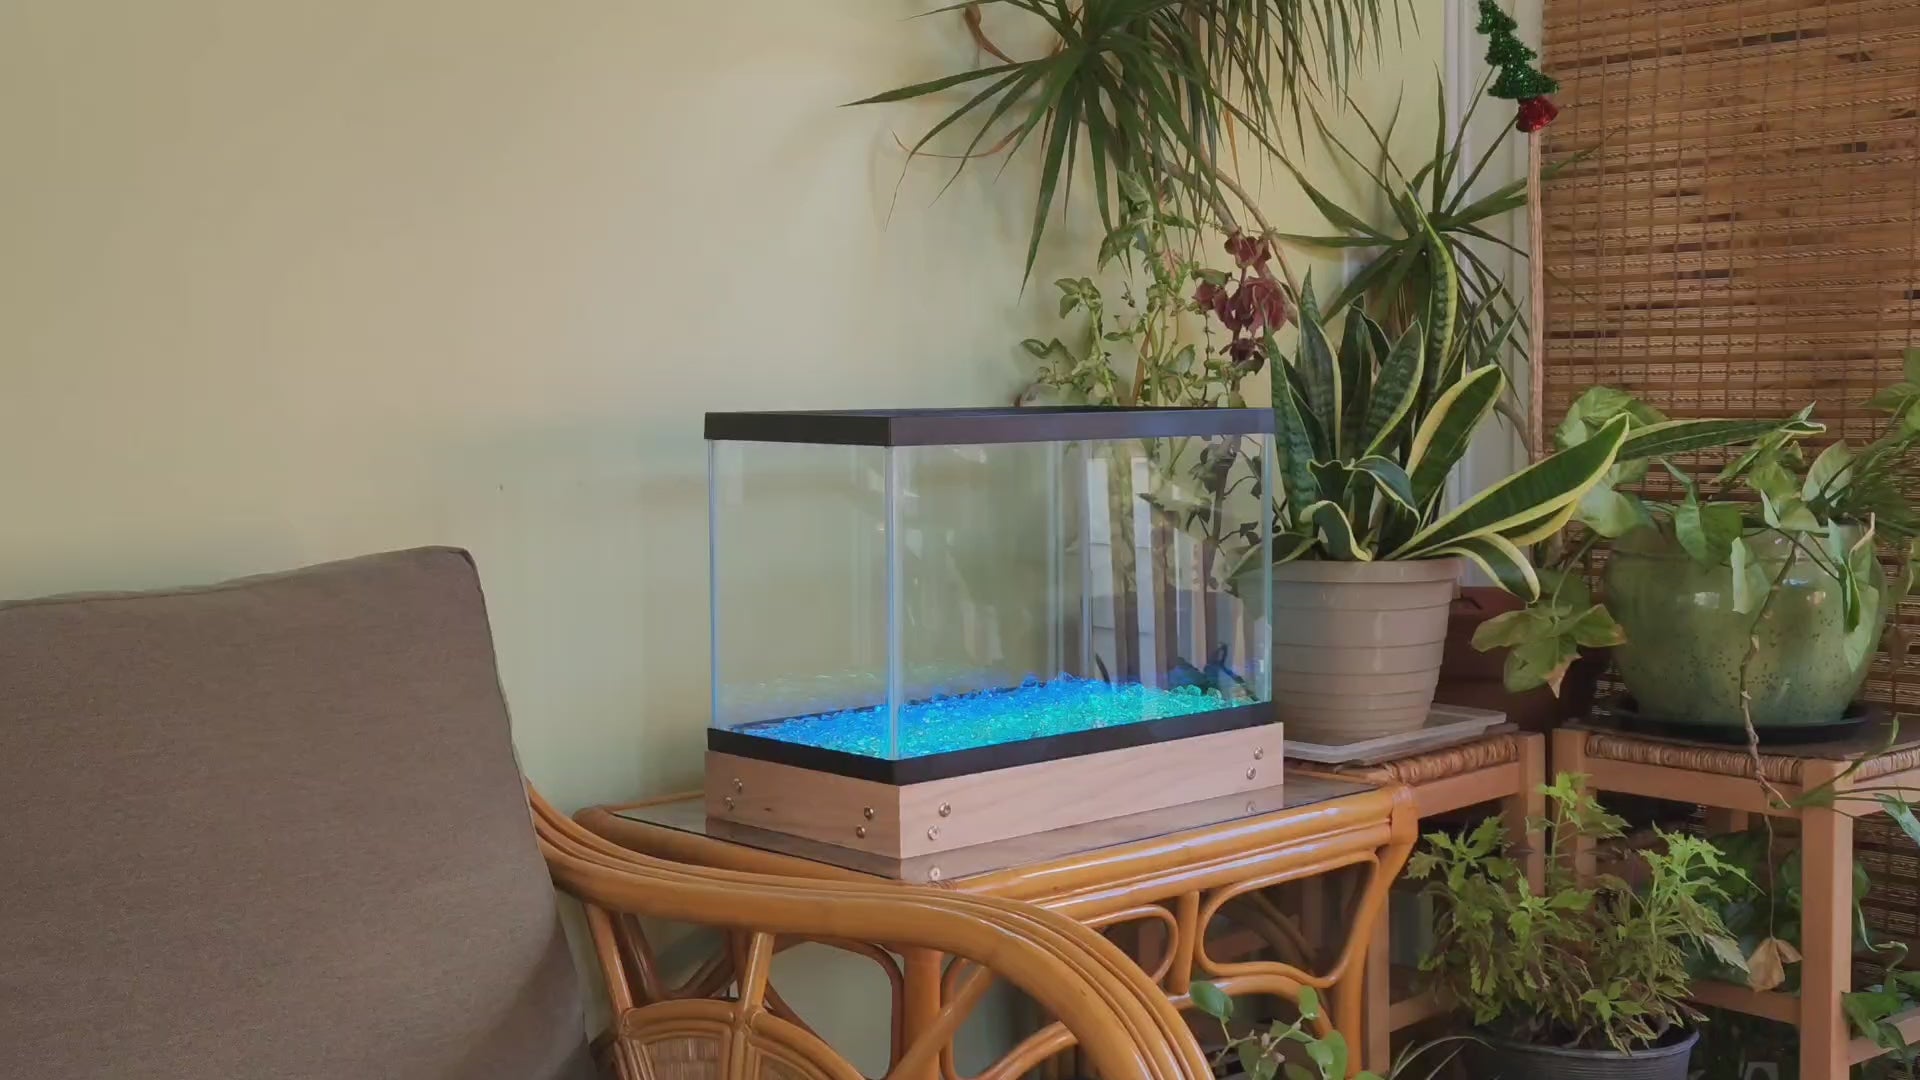 Load video: LED fish tank light changing colors.